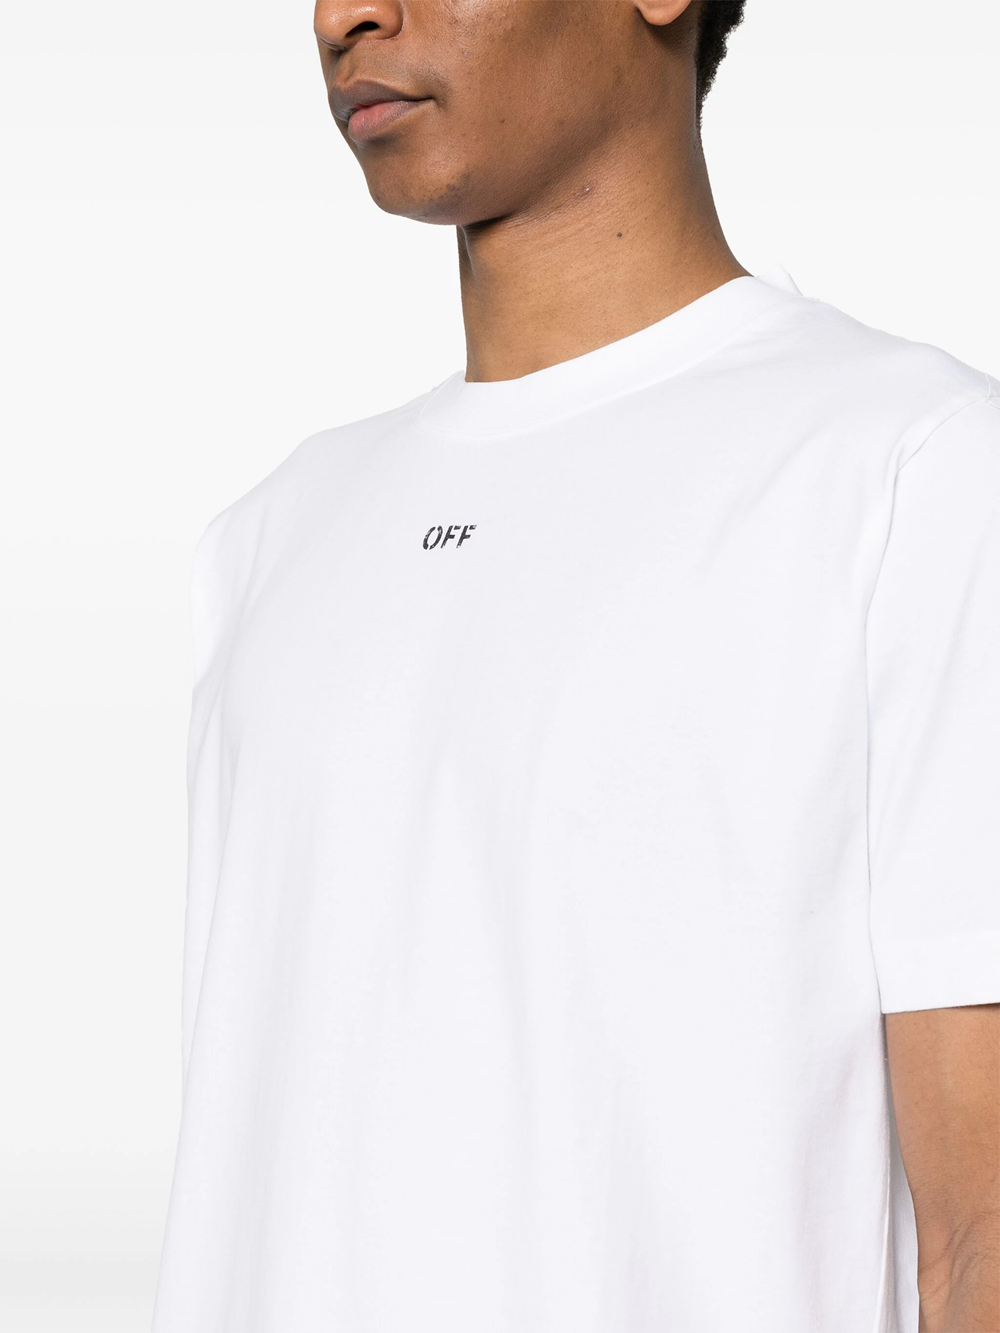 off-white T-shirt with print available on theapartmentcosenza.com 